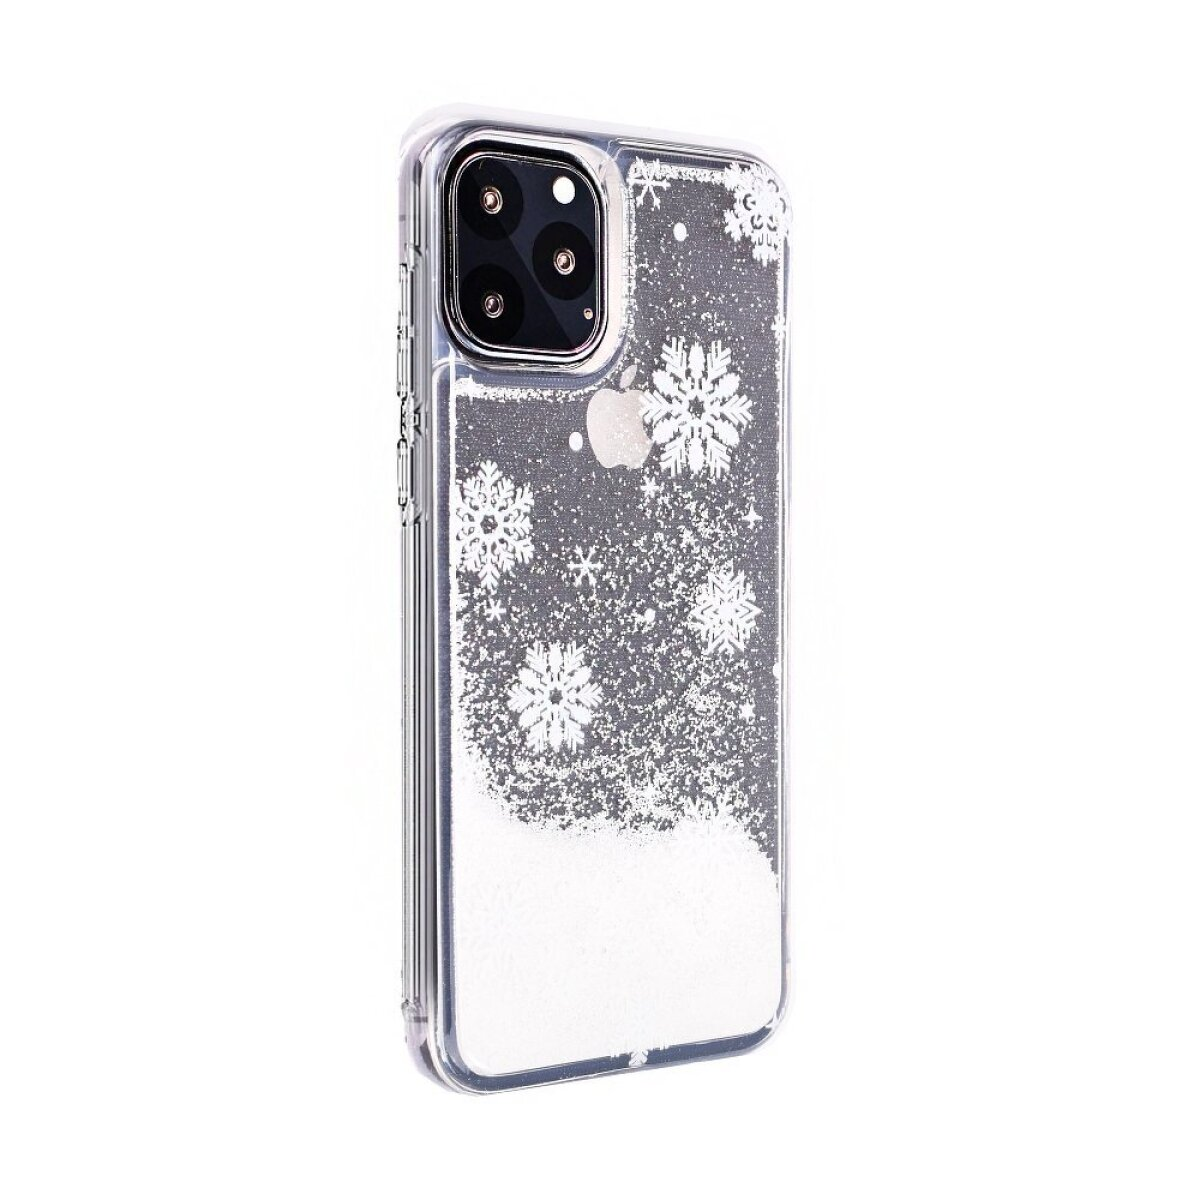 FORCELL Winter iPhone 11 available Full iPhone Max snowflakes, Pro Max, 11 Not Pro Apple, Cover